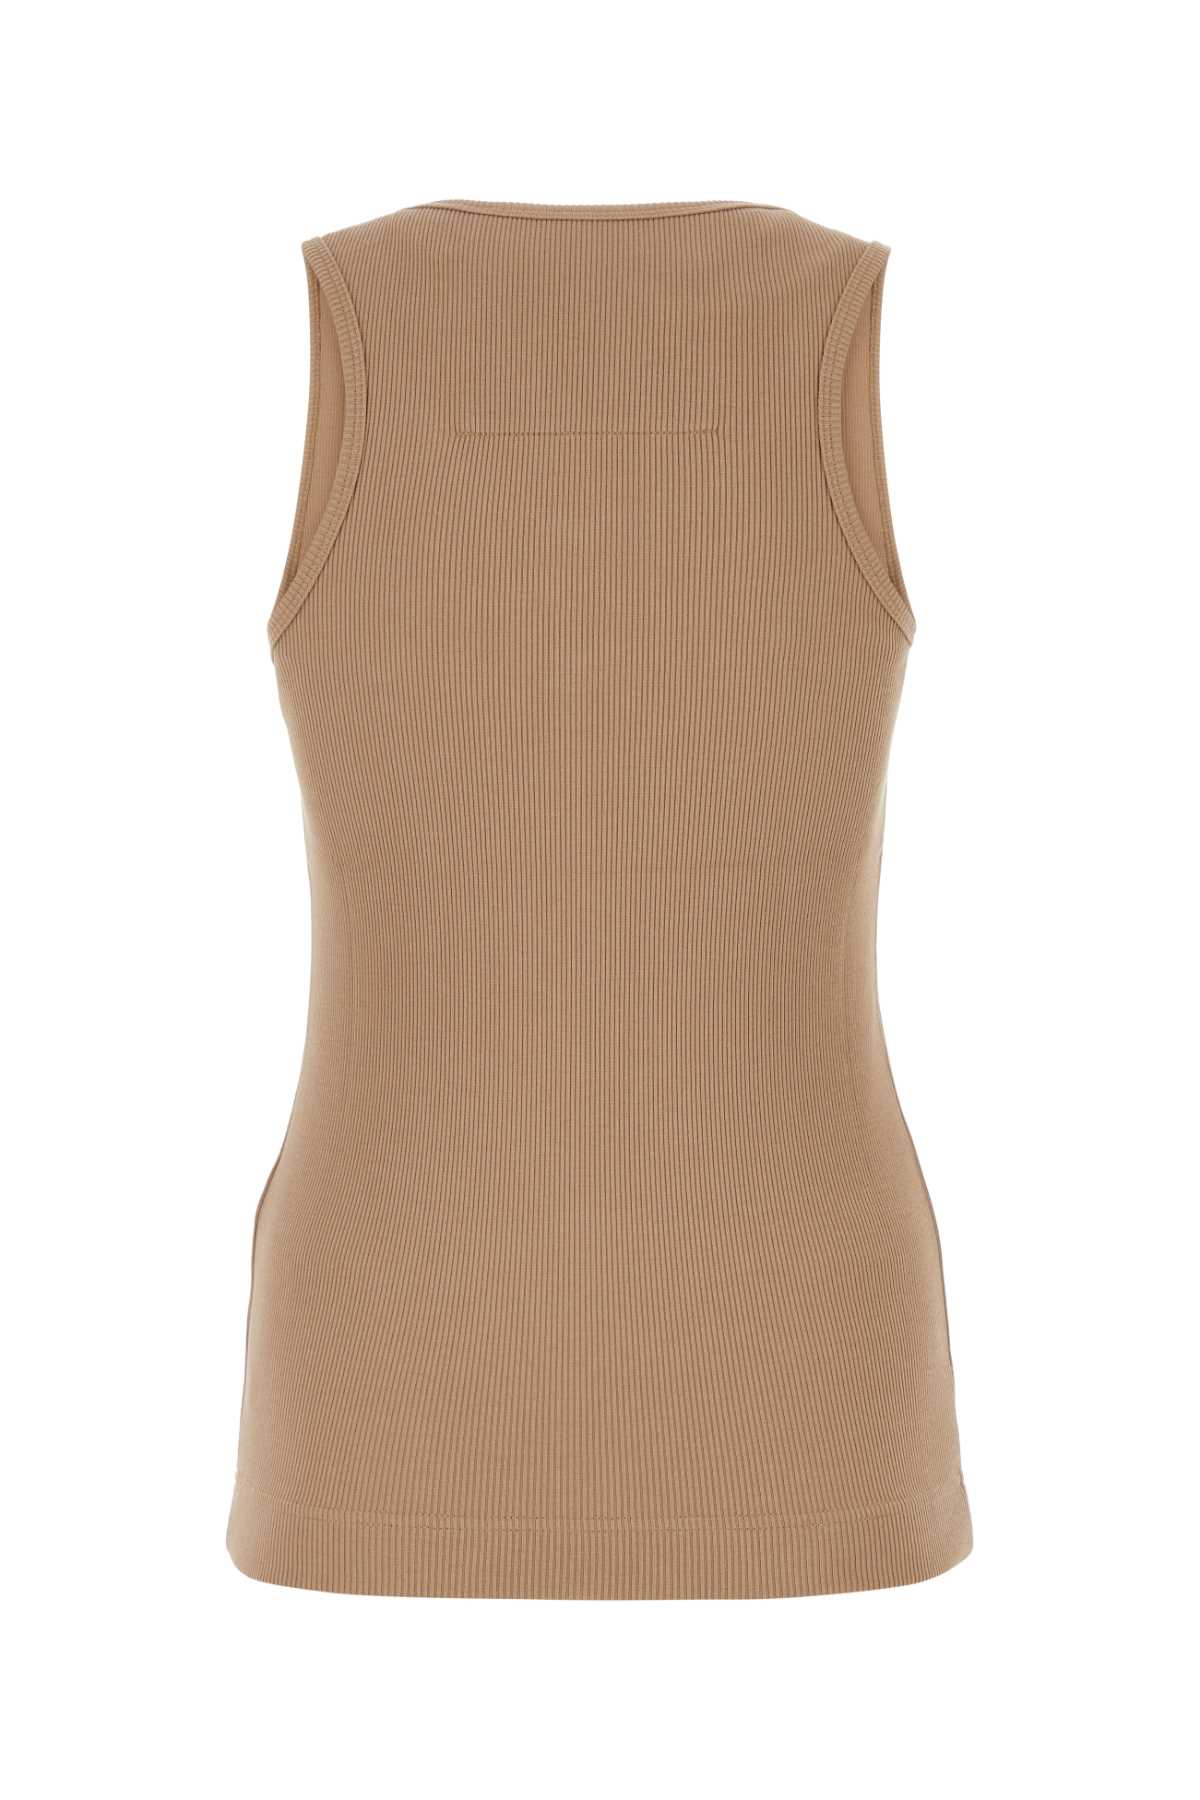 Givenchy Camel Stretch Cotton Tank Top In Beigecappuccino